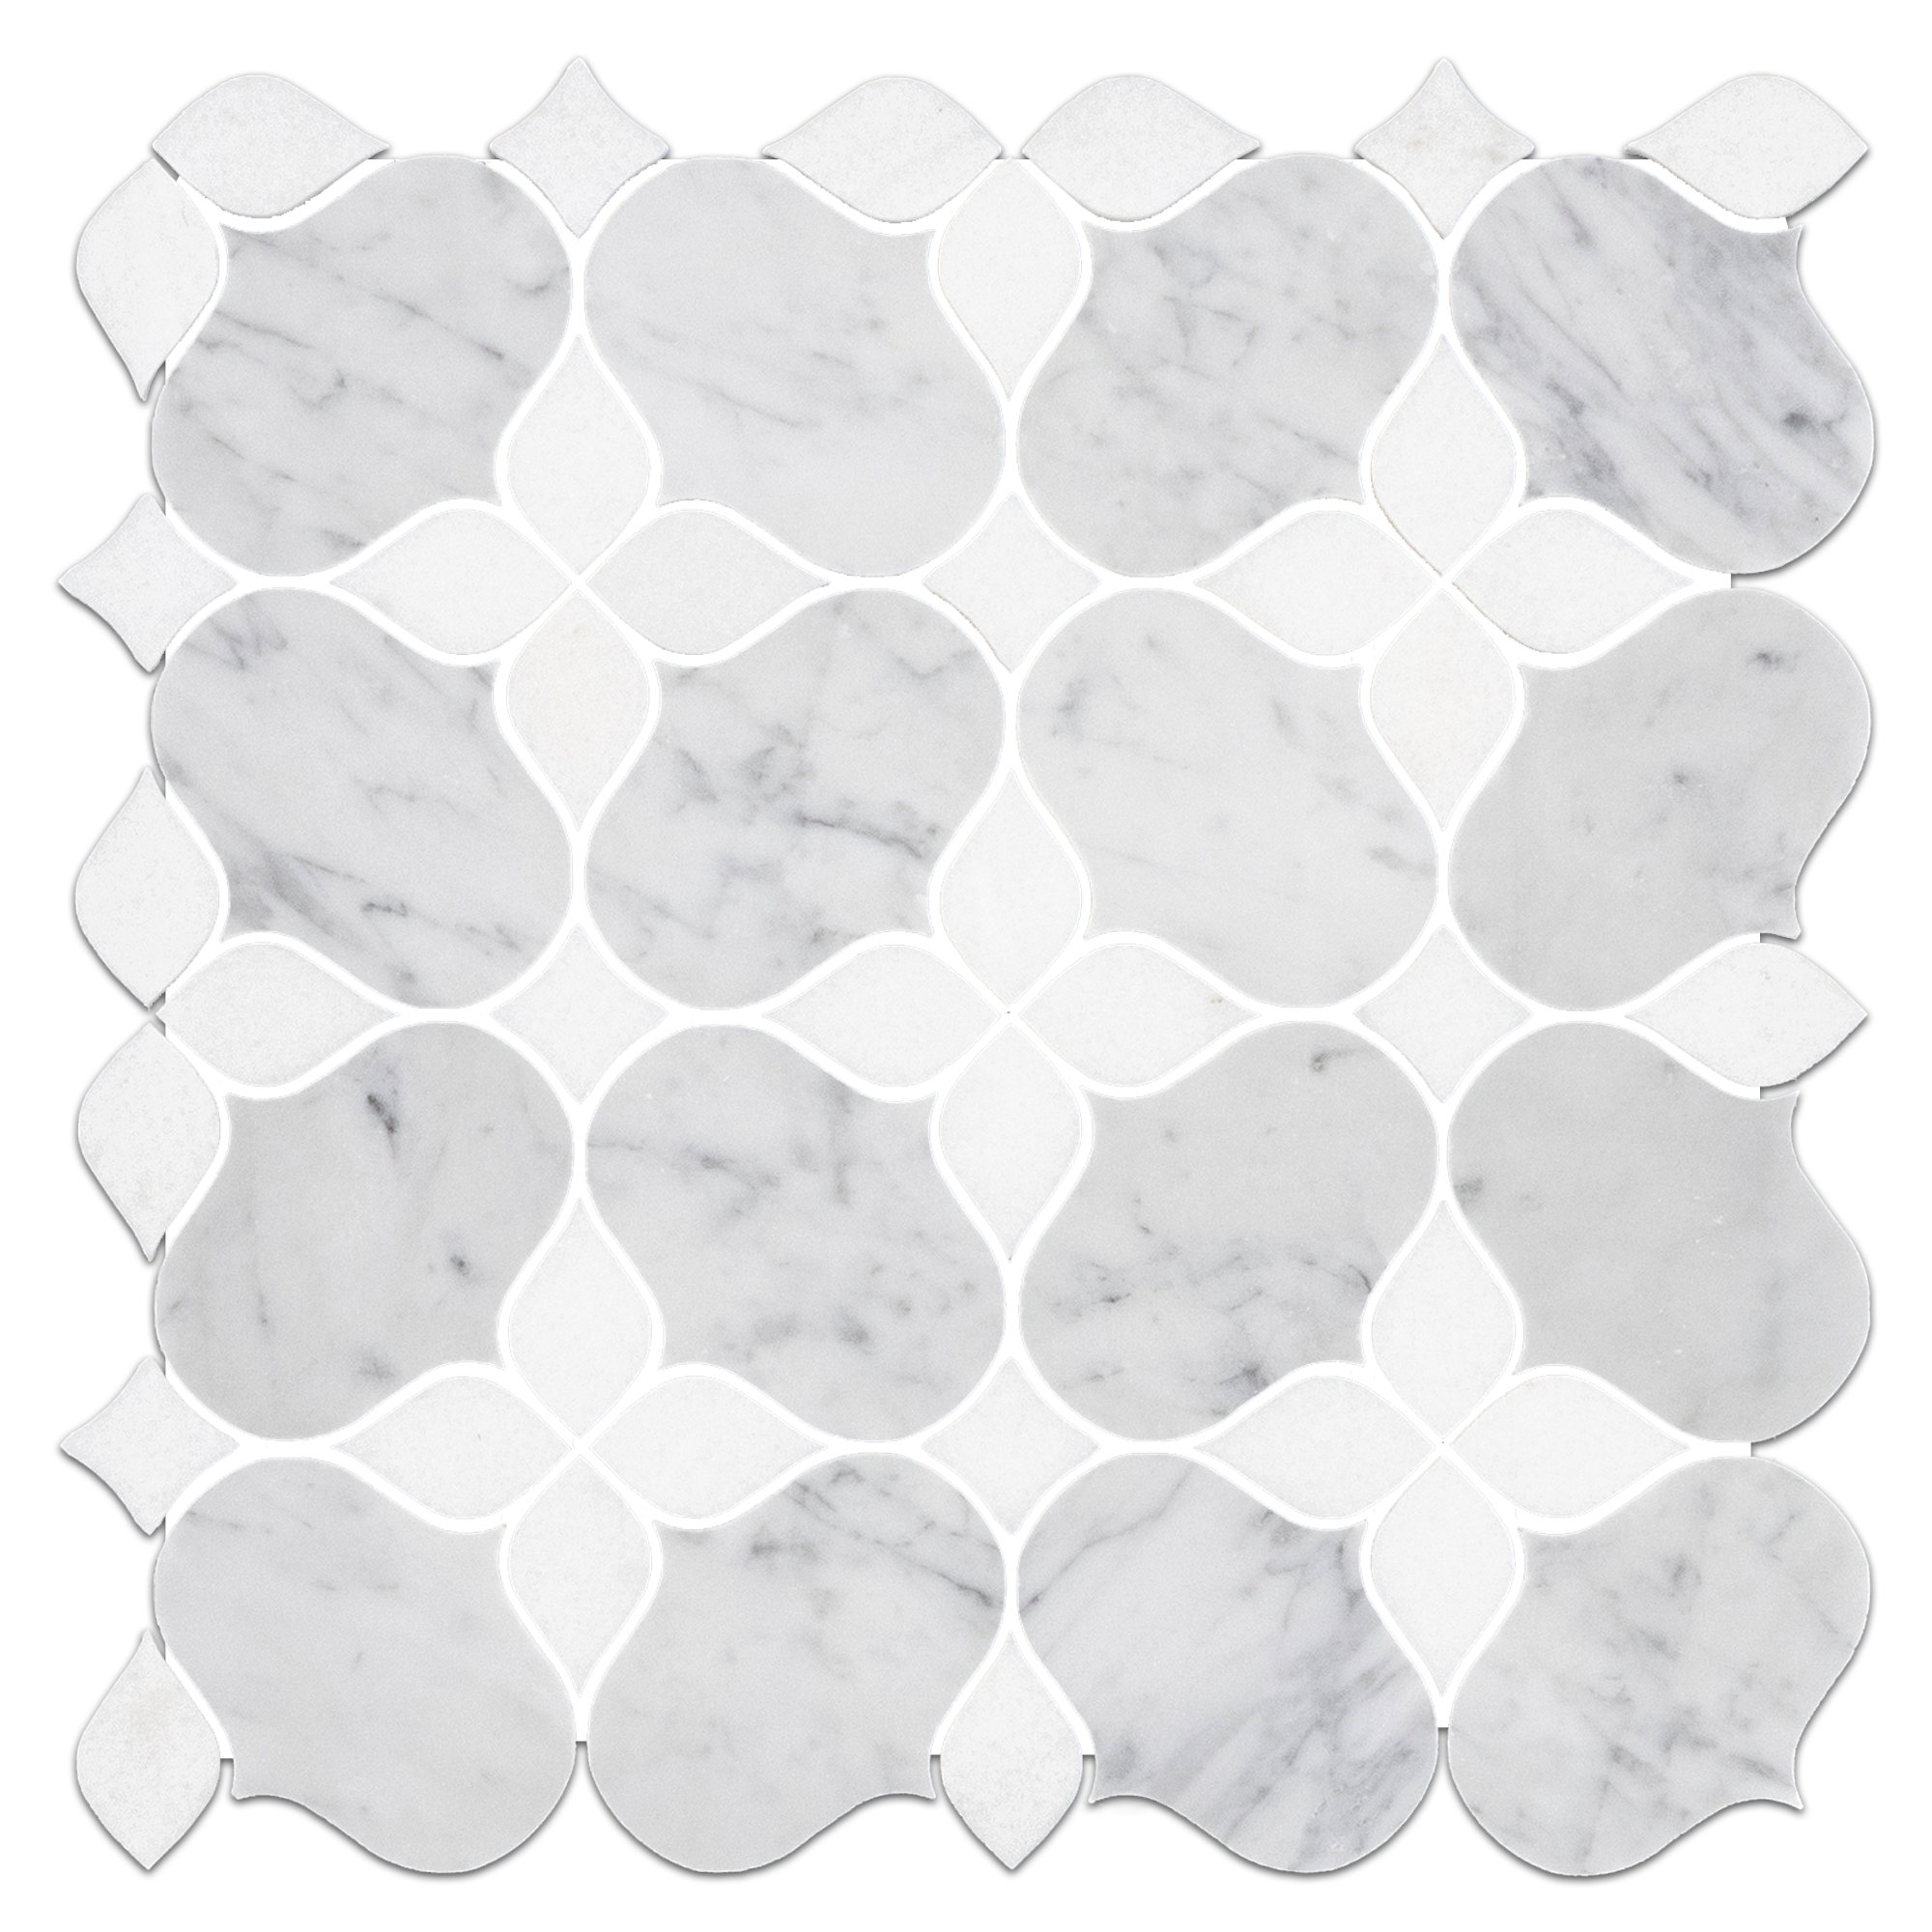 Elon Bianco Carrara and White Thassos Marble Silhouette Field Mosaic Tile, 11.6875x11.6875 inches, Honed Finish